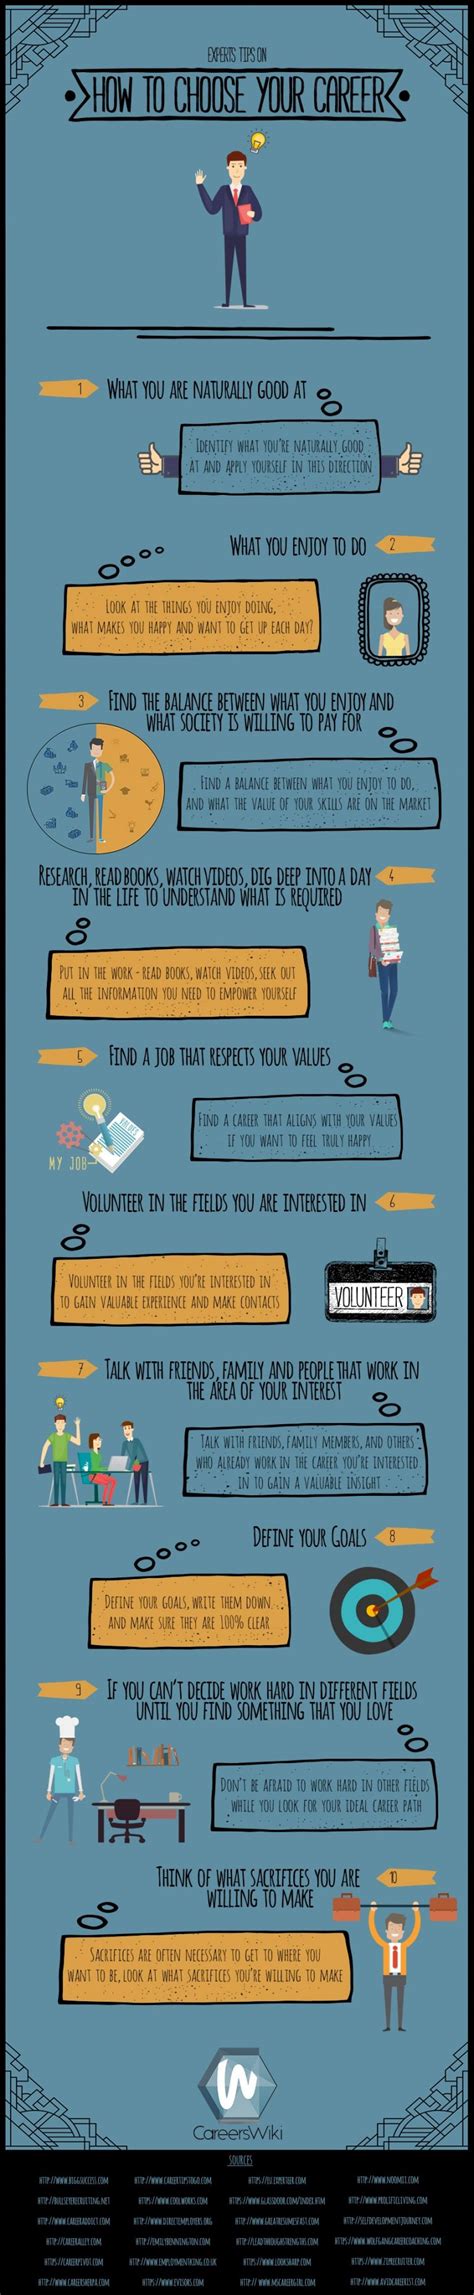 How To Choose A Career Thats Best For You Infographic